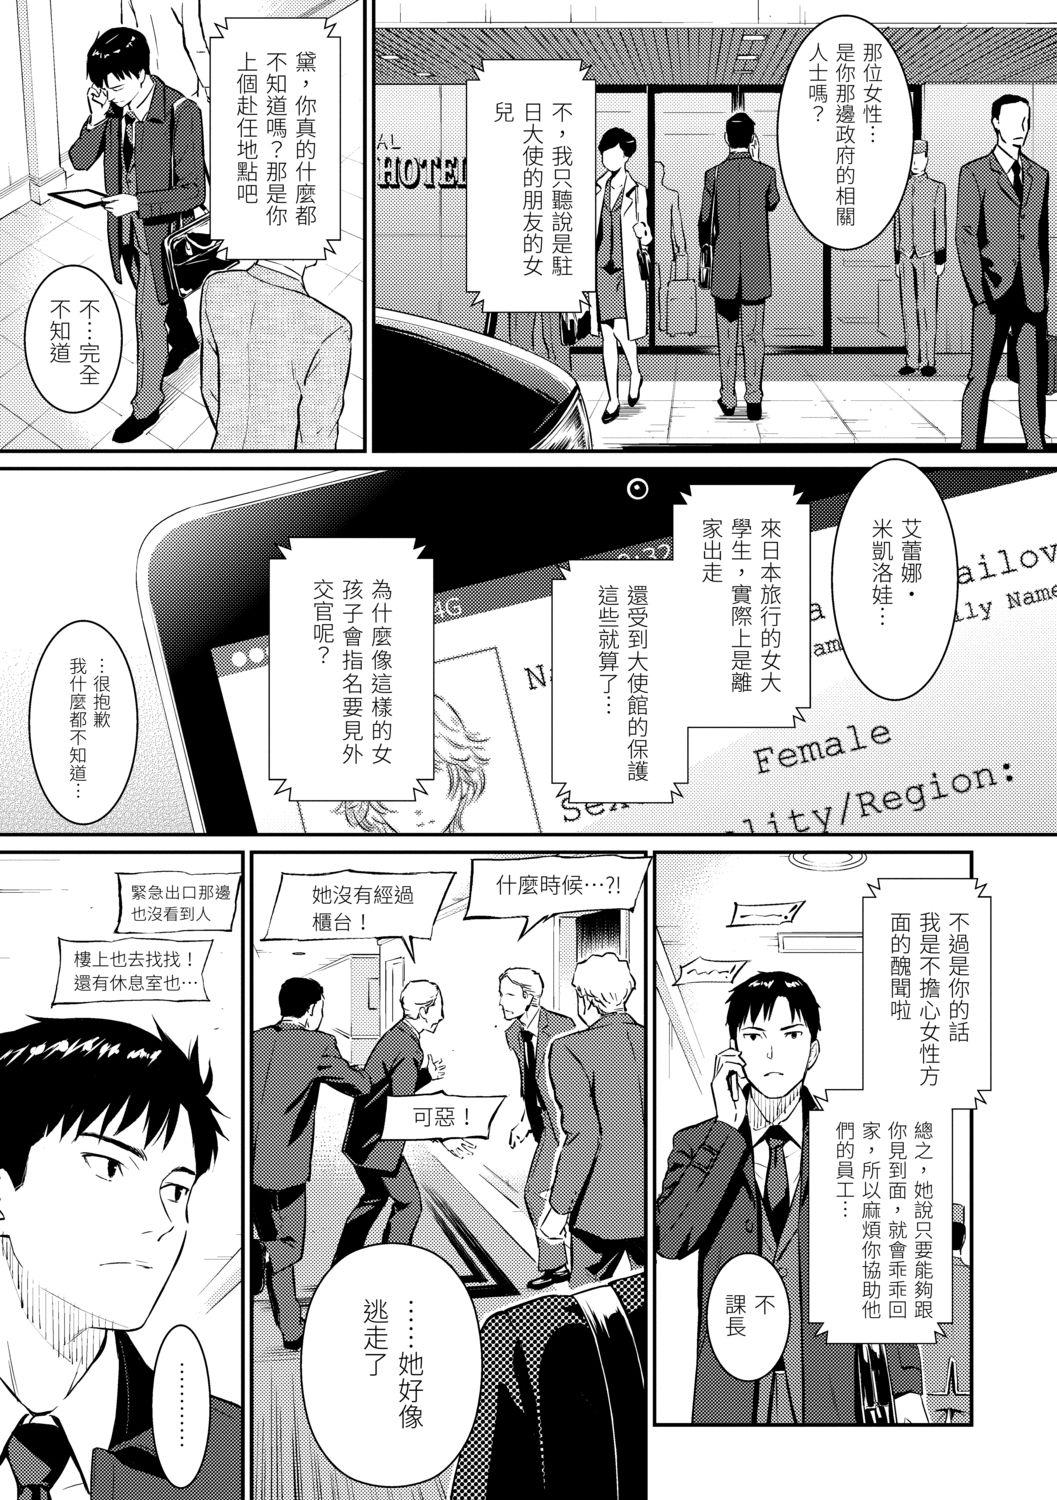 Amateur Blow Job Kyuuai Etranger | 求愛異鄉人 From - Page 11